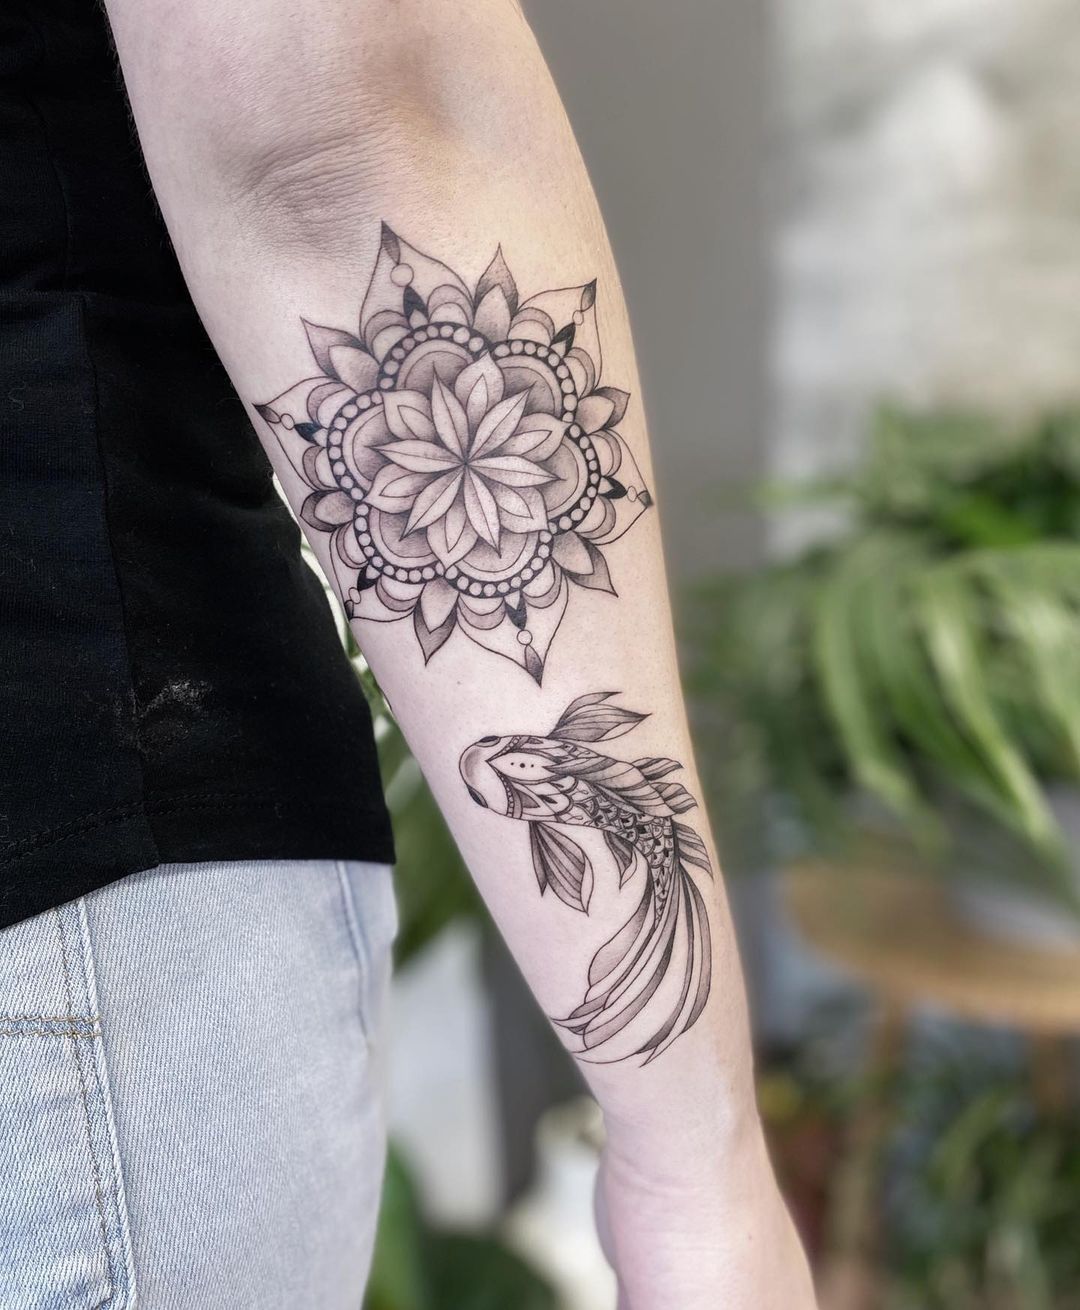 20 inspiring mental health tattoos ideas to try and their significance   YENCOMGH